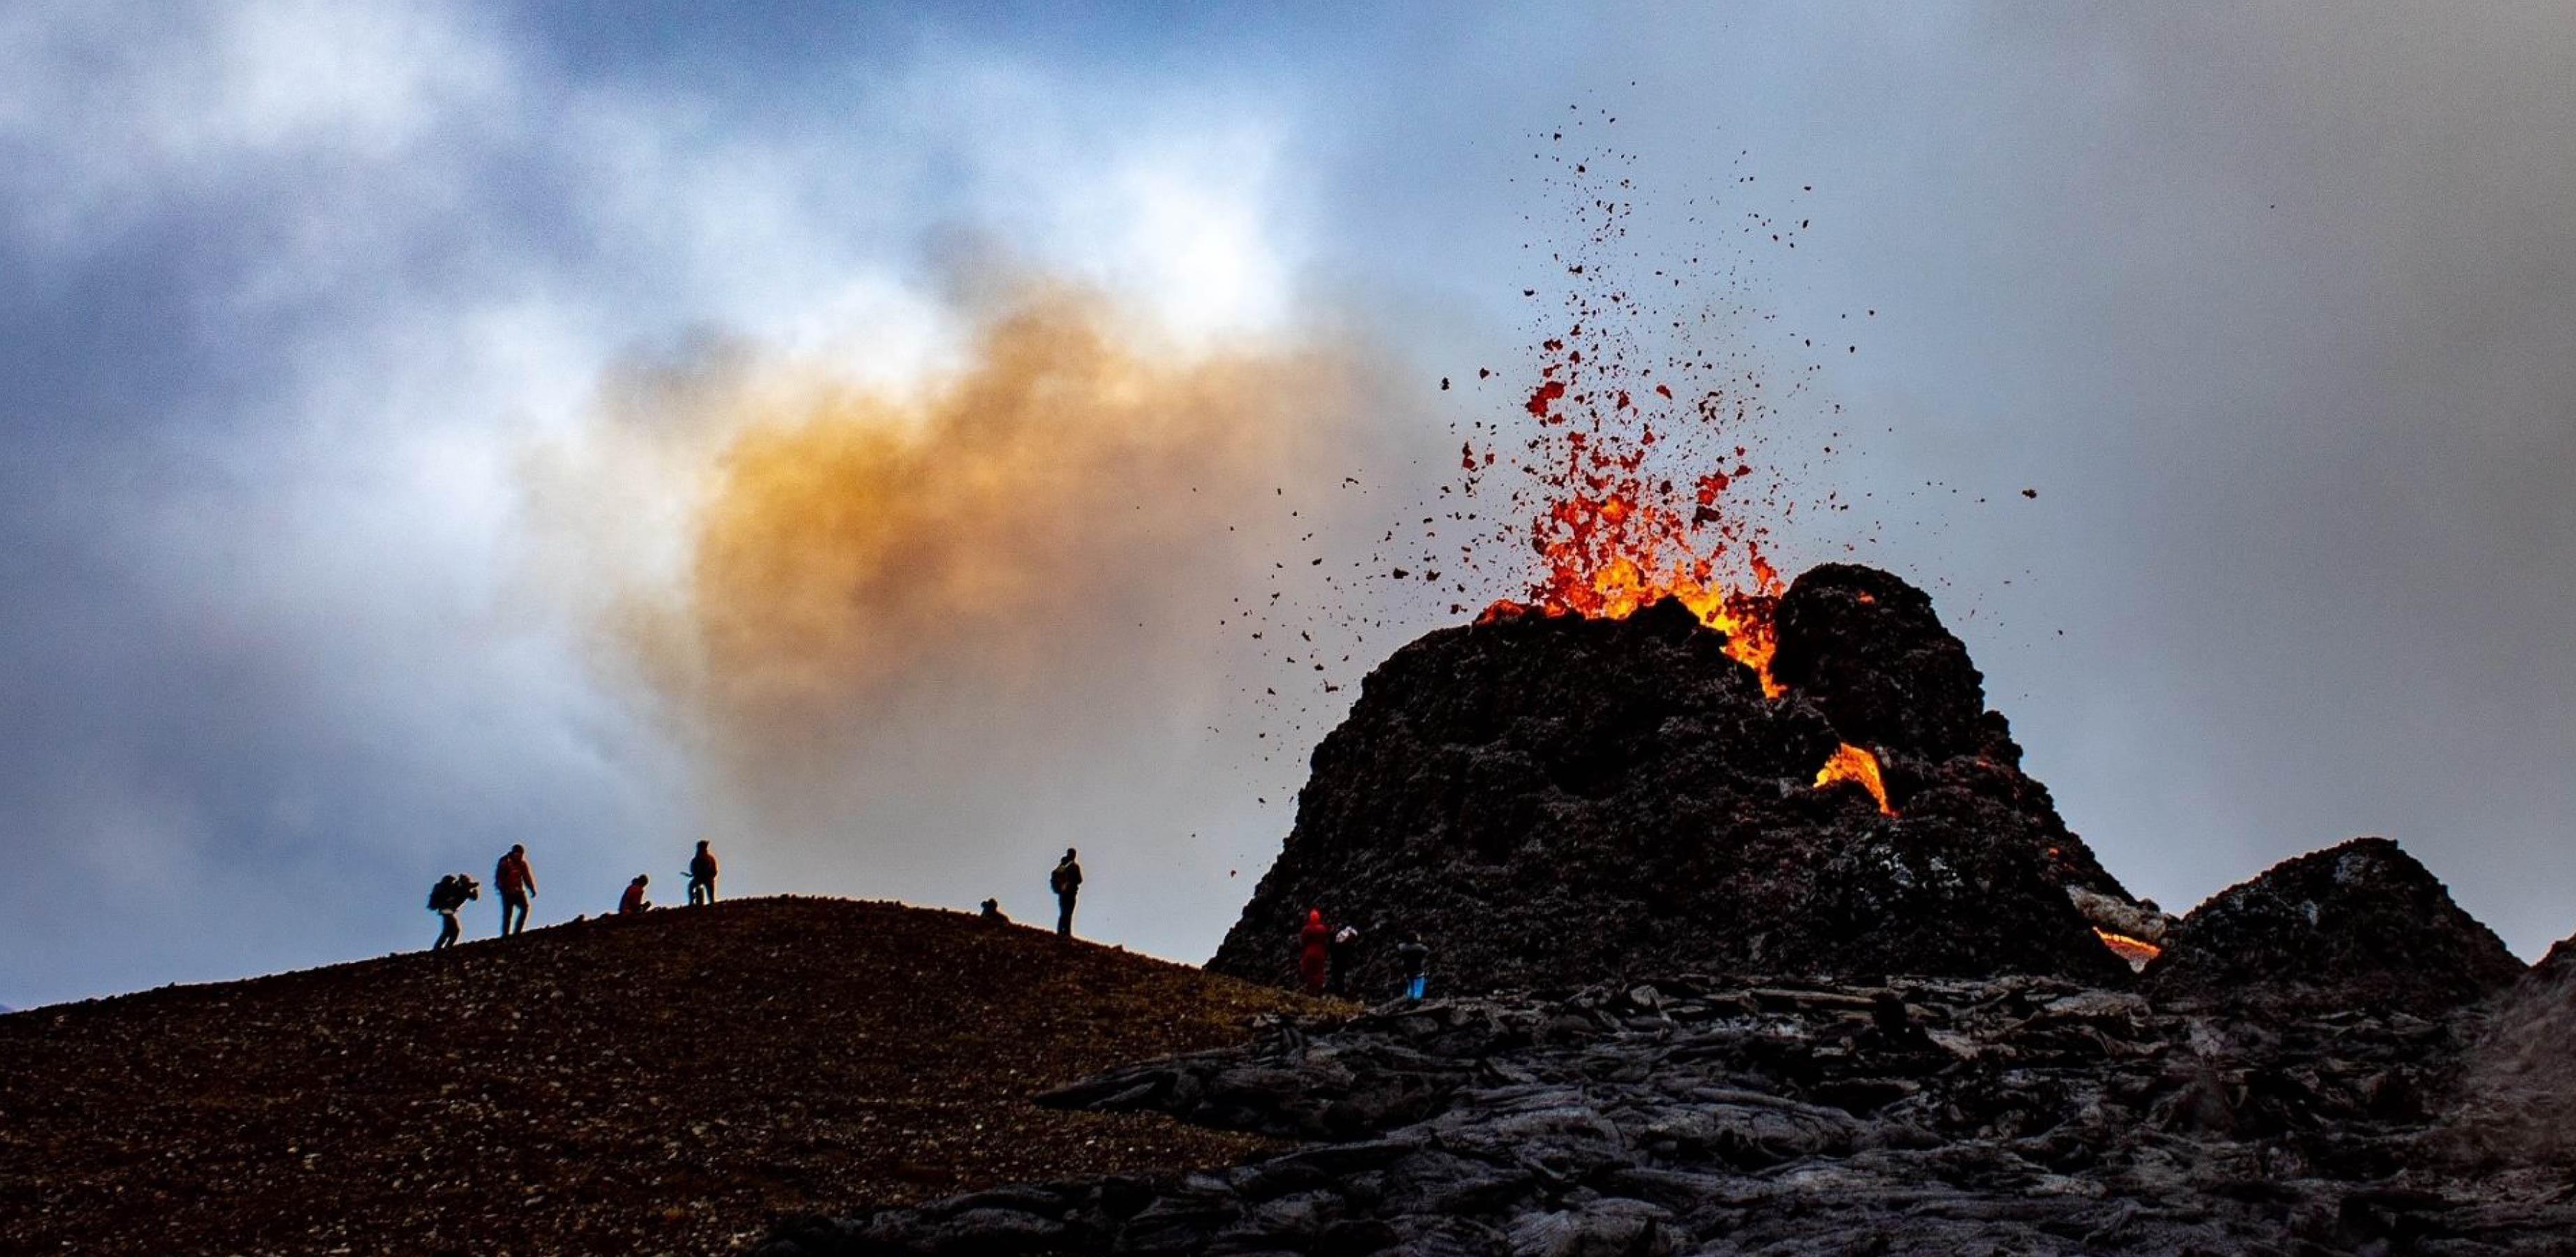 Photo showing a volcanic spatter cone erupting with lava coming out of the top